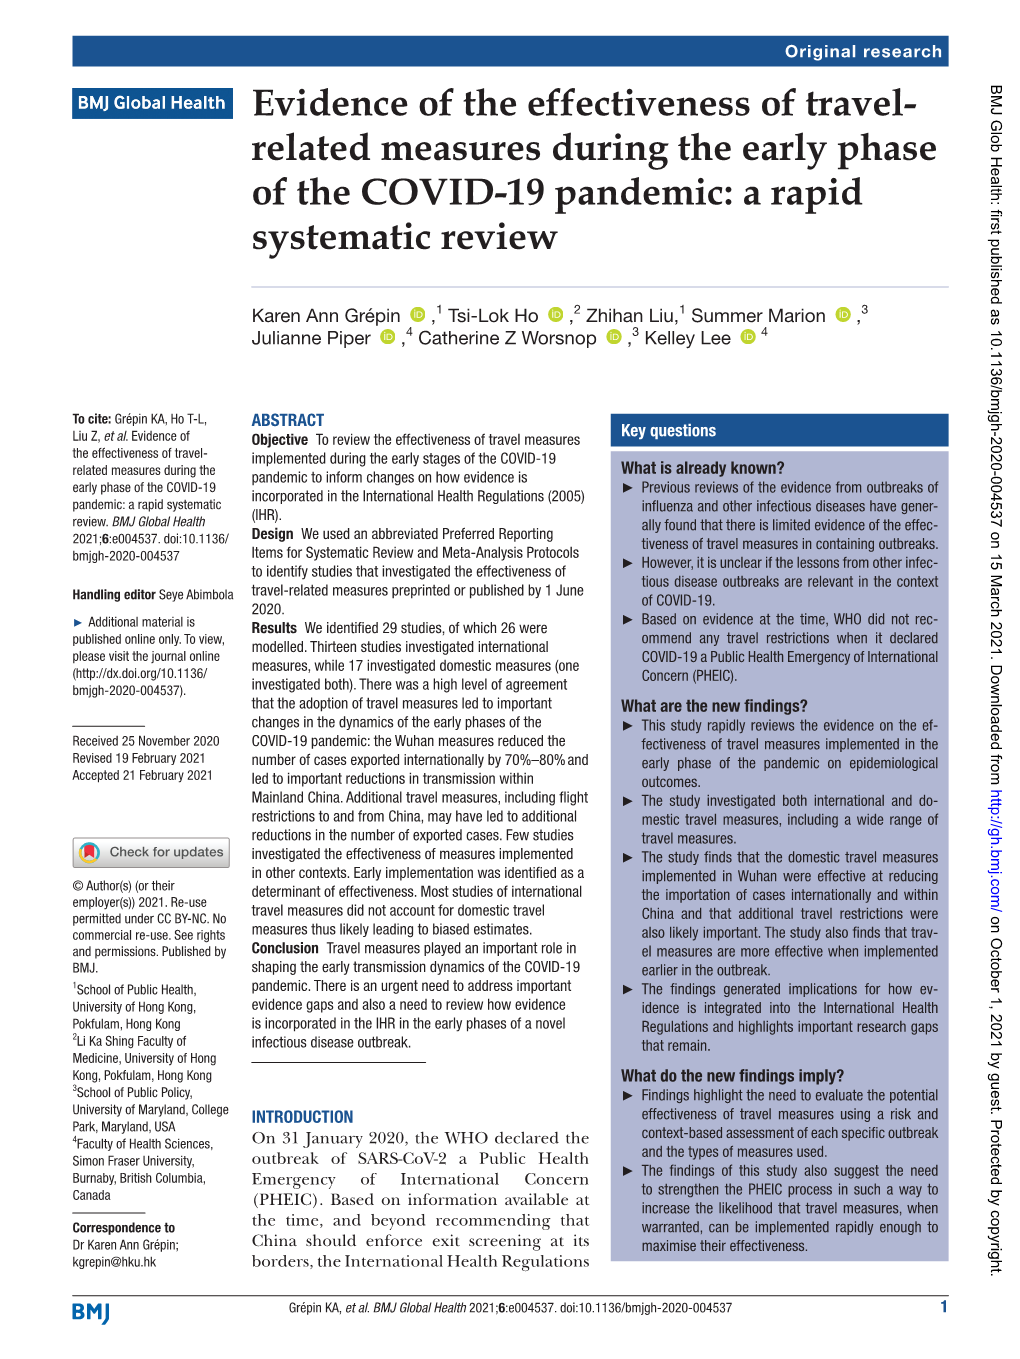 Related Measures During the Early Phase of the COVID-19 Pandemic: a Rapid Systematic Review